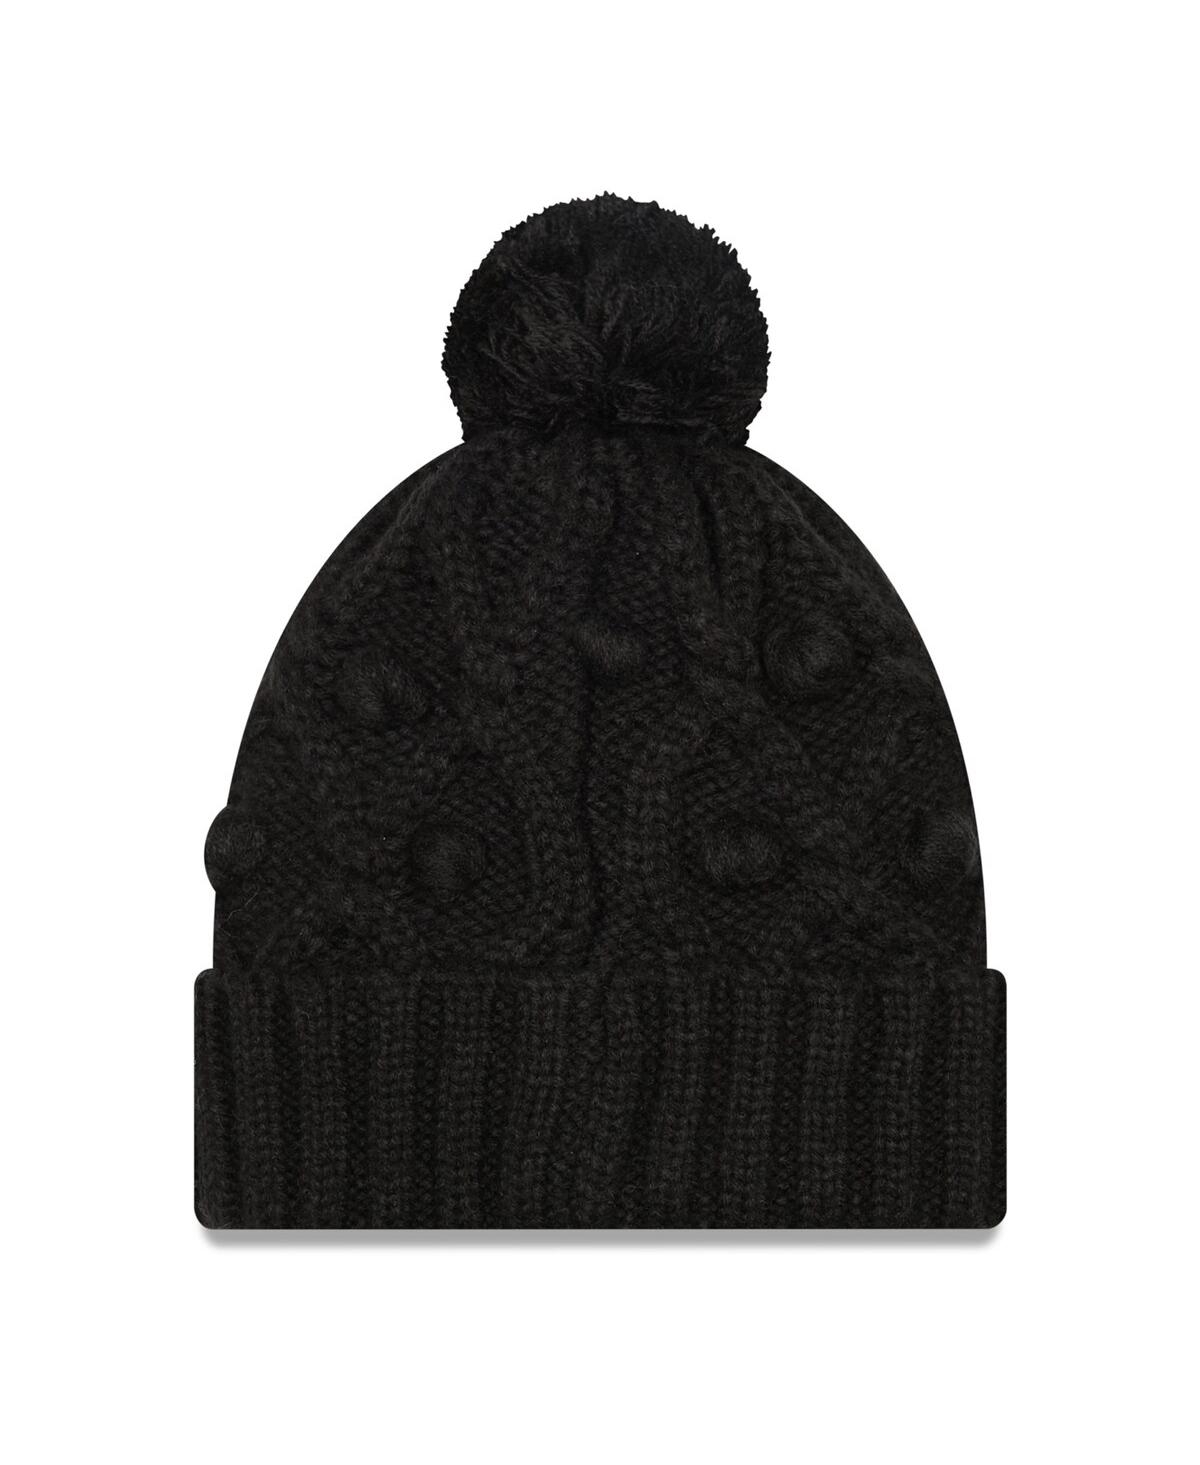 Shop New Era Women's  Black Pittsburgh Steelers Toasty Cuffed Knit Hat With Pom